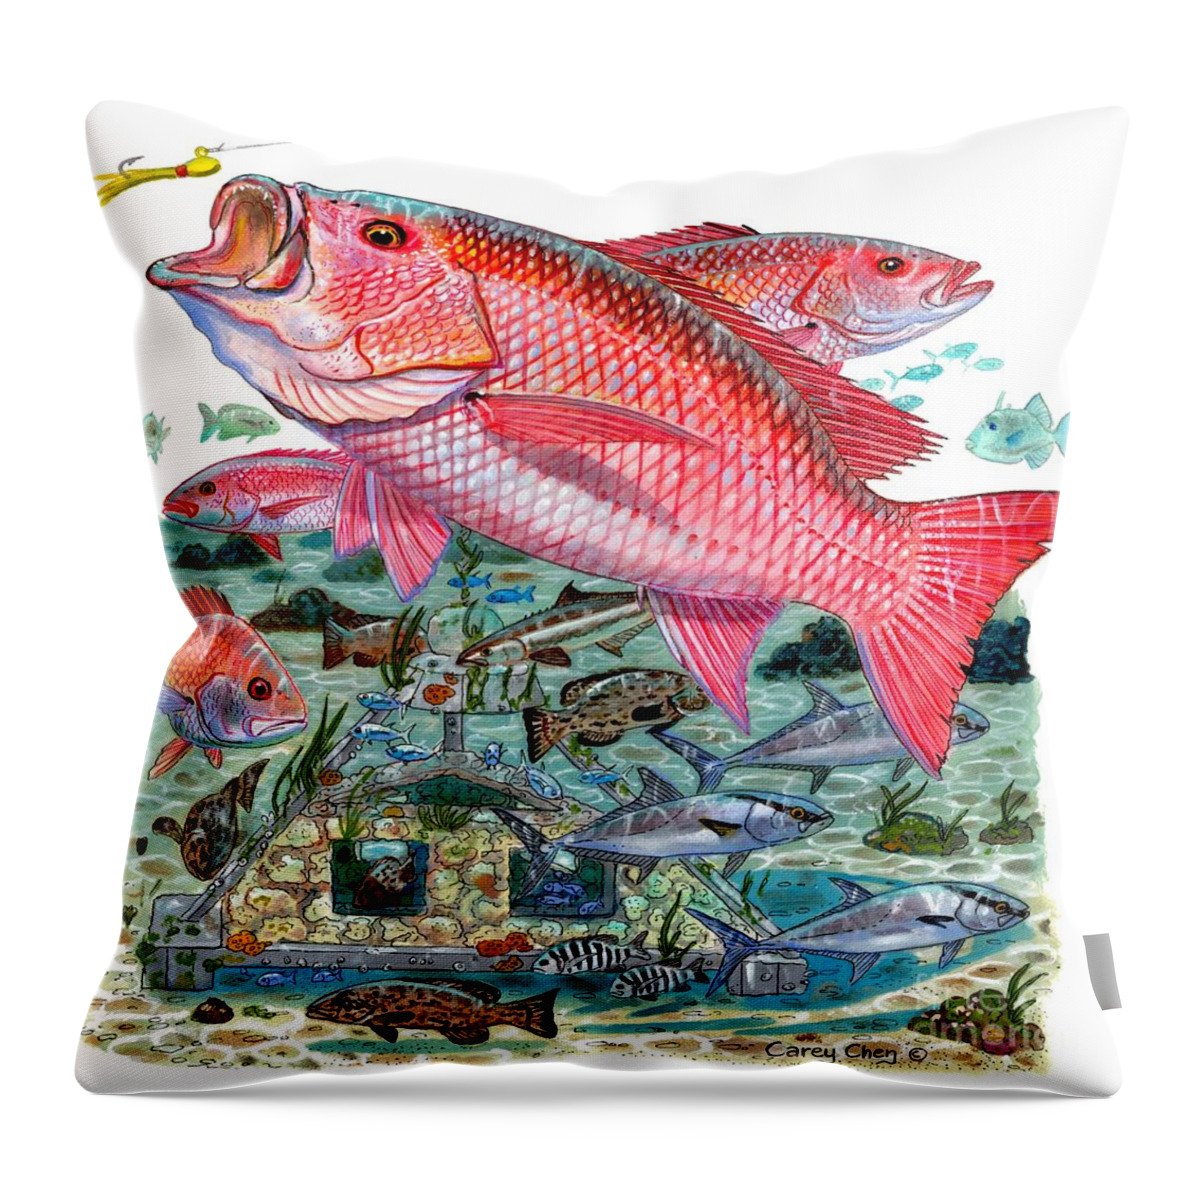 Snapper Throw Pillow featuring the painting Red Snapper by Carey Chen